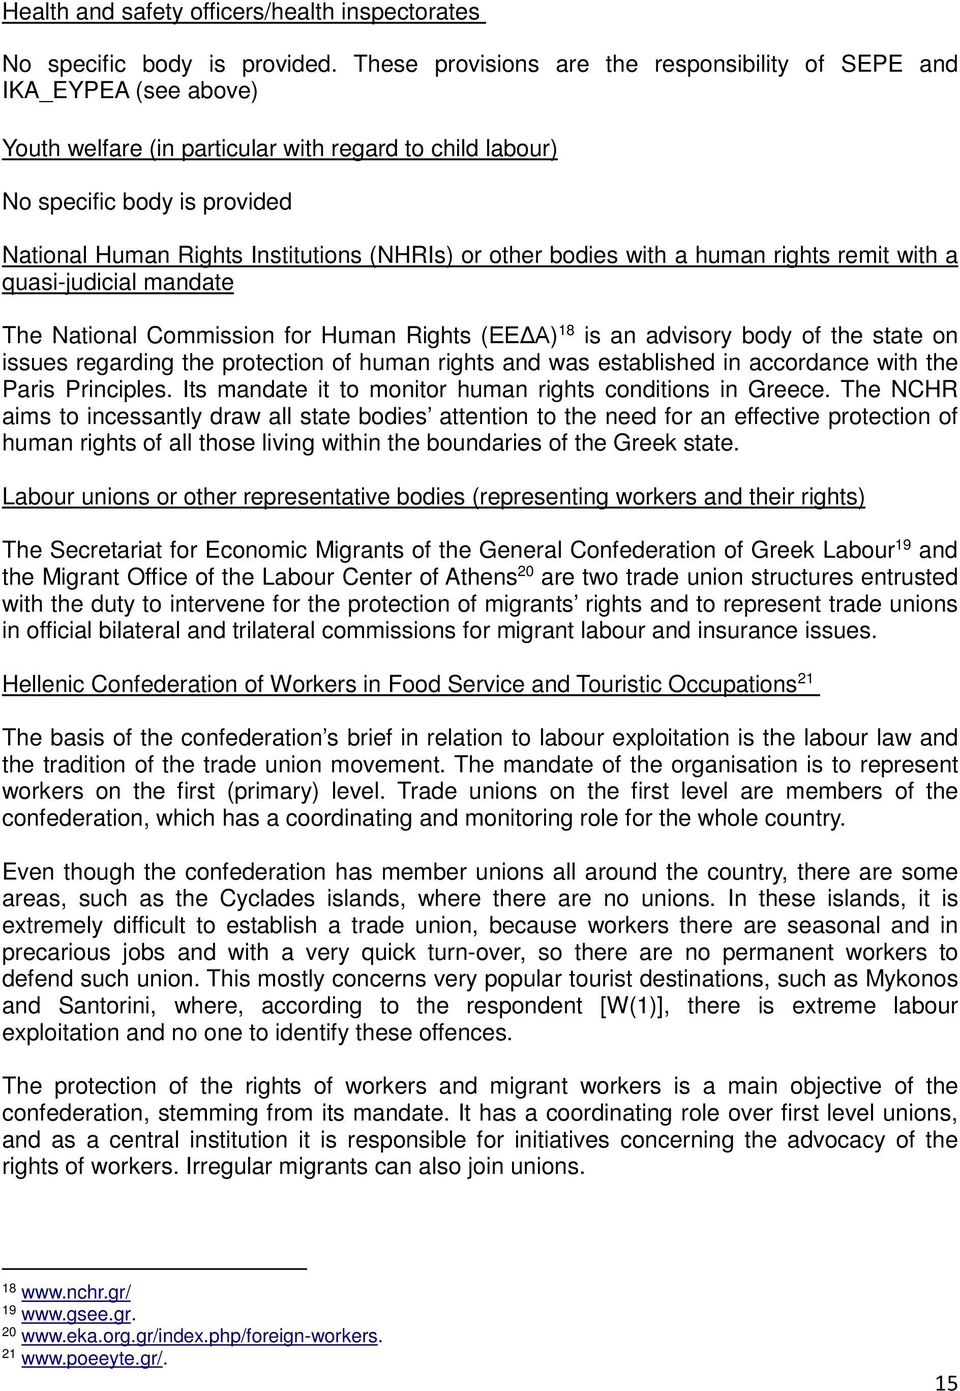 (NHRIs) or other bodies with a human rights remit with a quasi-judicial mandate The National Commission for Human Rights (ΕΕΔΑ) 18 is an advisory body of the state on issues regarding the protection